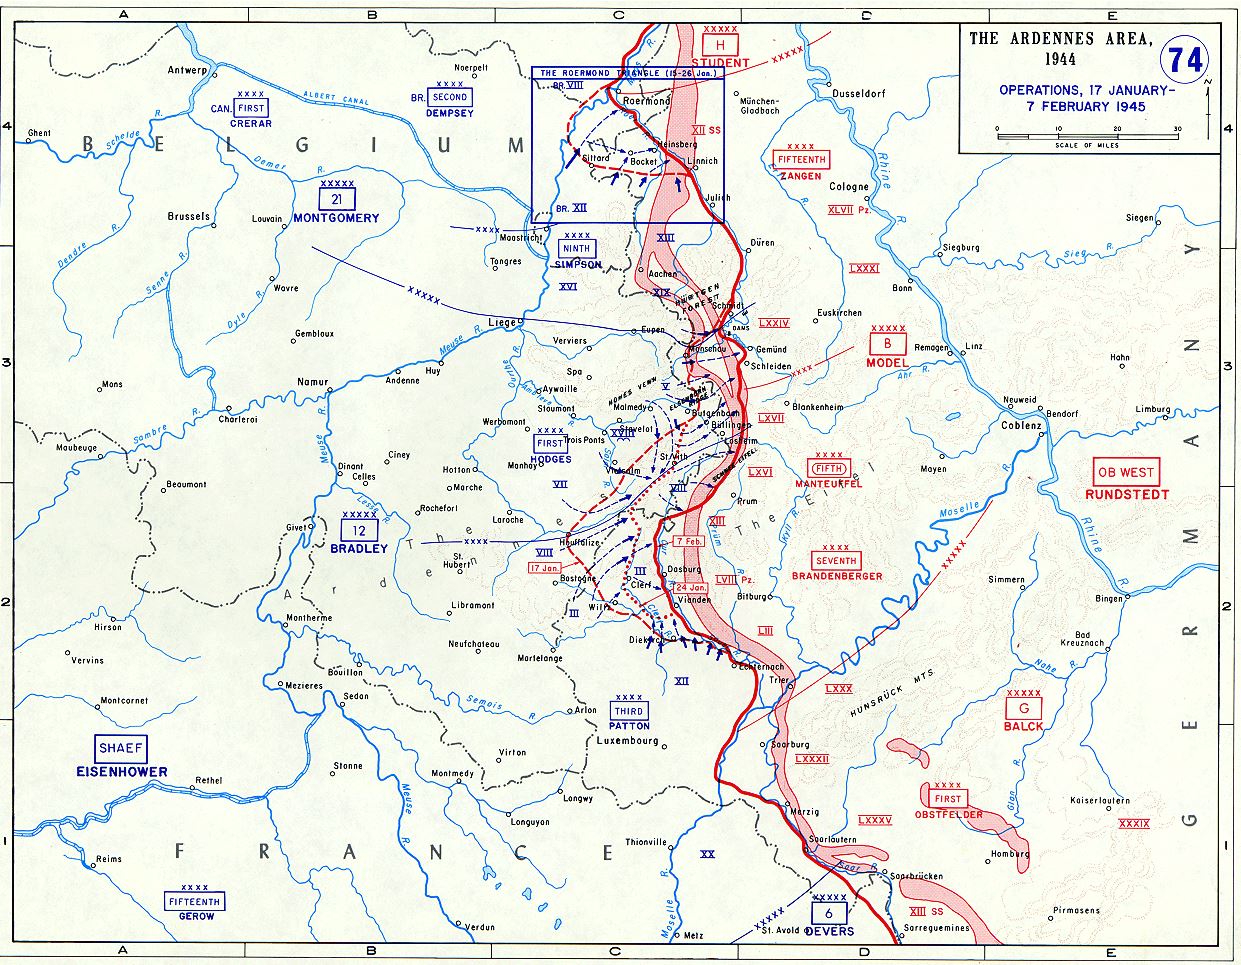 Axis collapse, Allied victory PETIT DIEULOIS